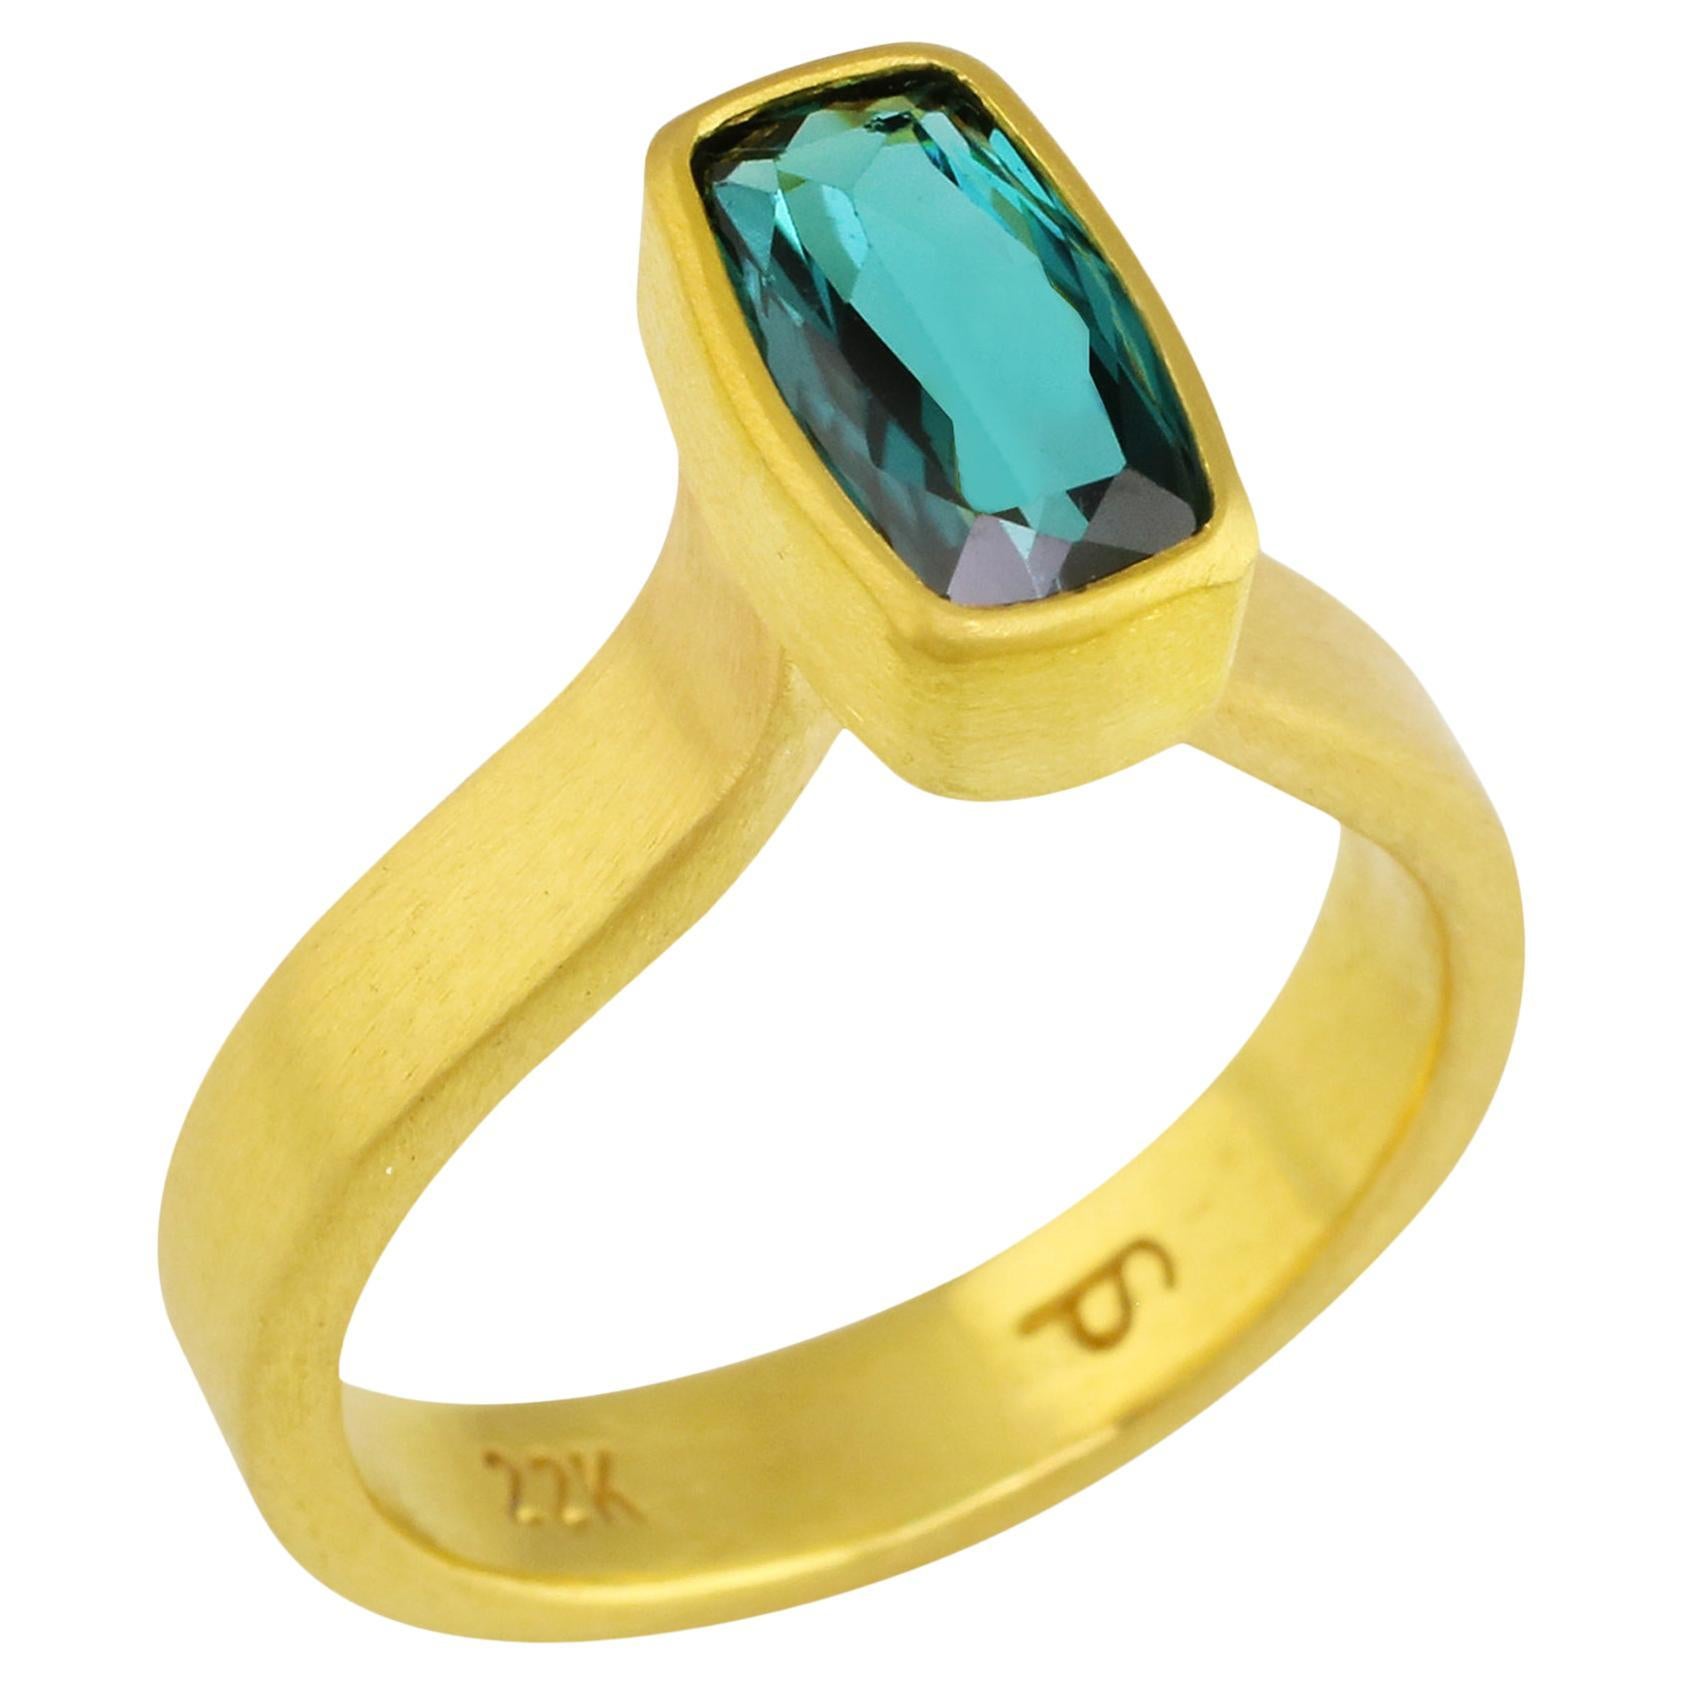 PHILIPPE SPENCER 1.6 Ct. Teal Tourmaline Statement Ring in 22K Gold